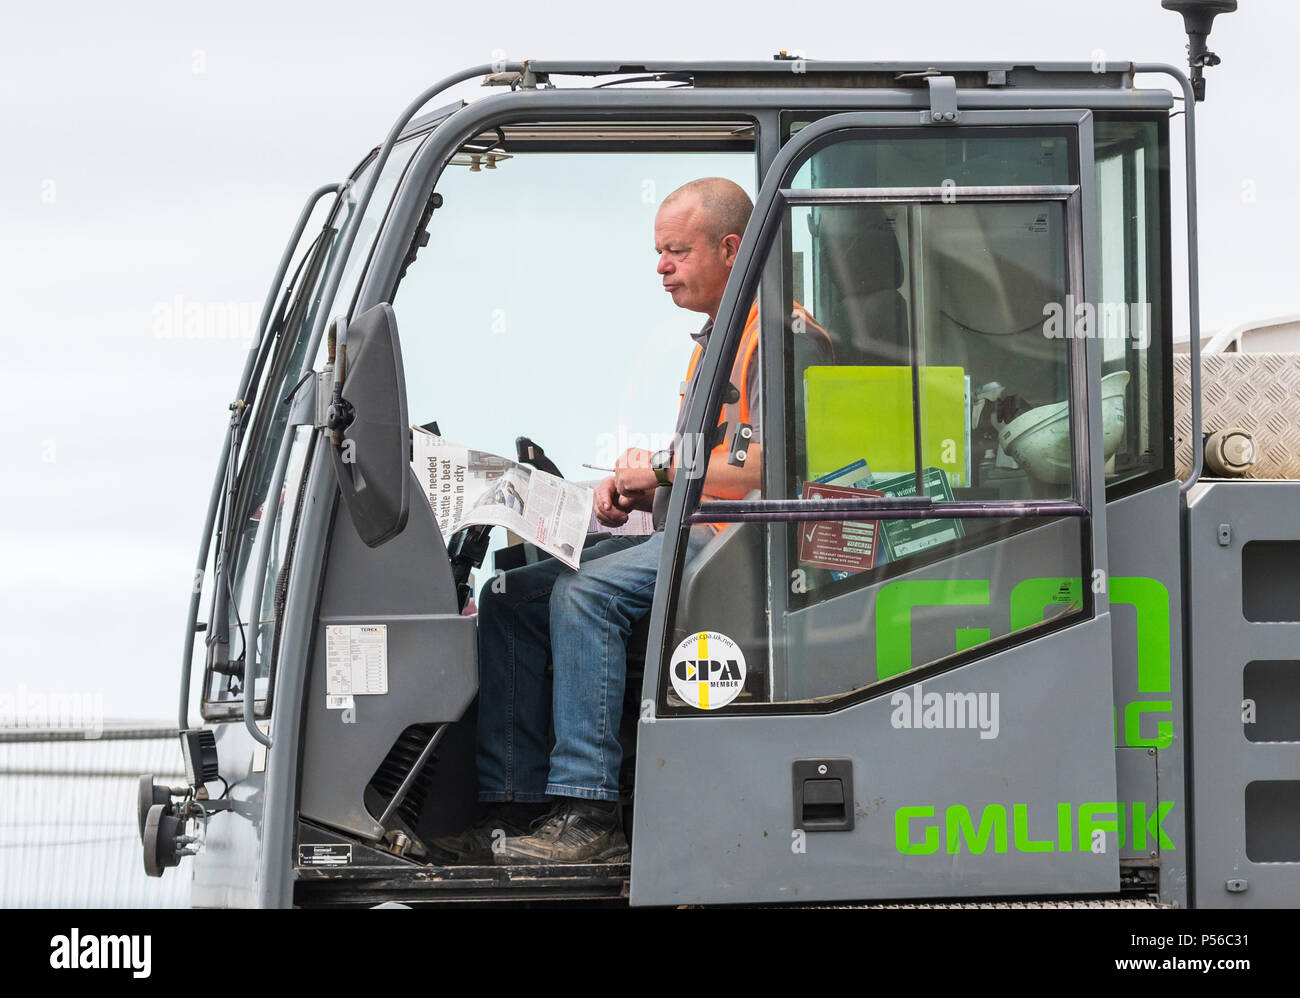 Workman sitting in construction vehicle reading a newspaper while taking a break from work, in the UK. Stock Photo